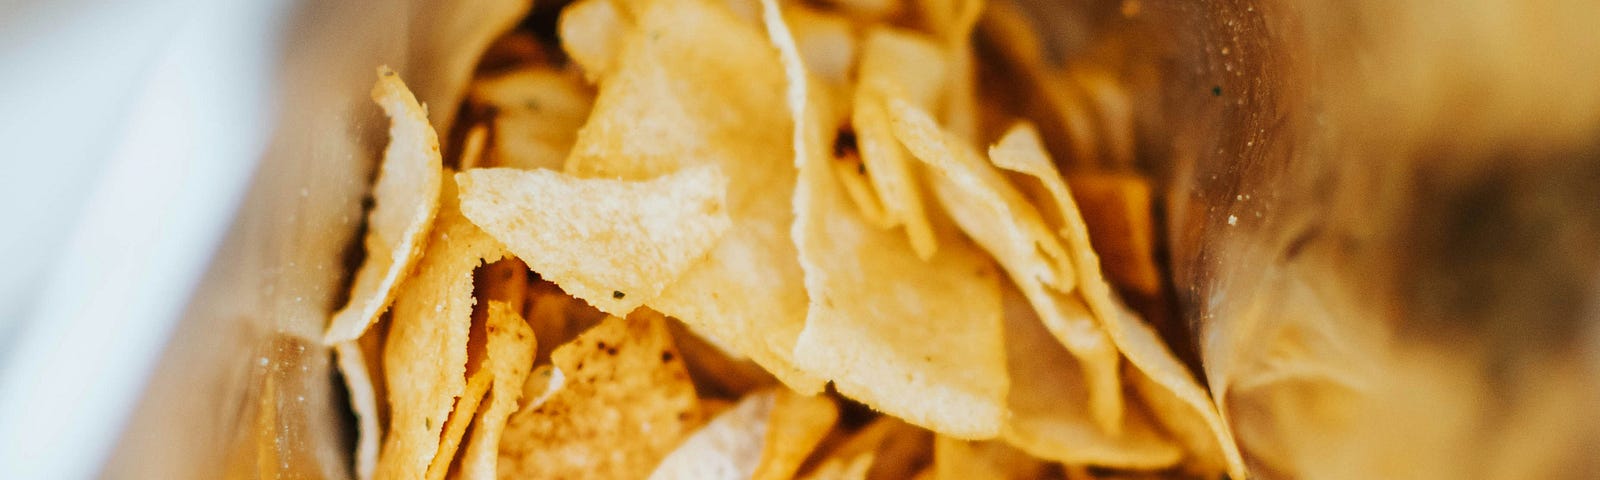 A top down photo into a bag of crisps (that’s chips for Americans)